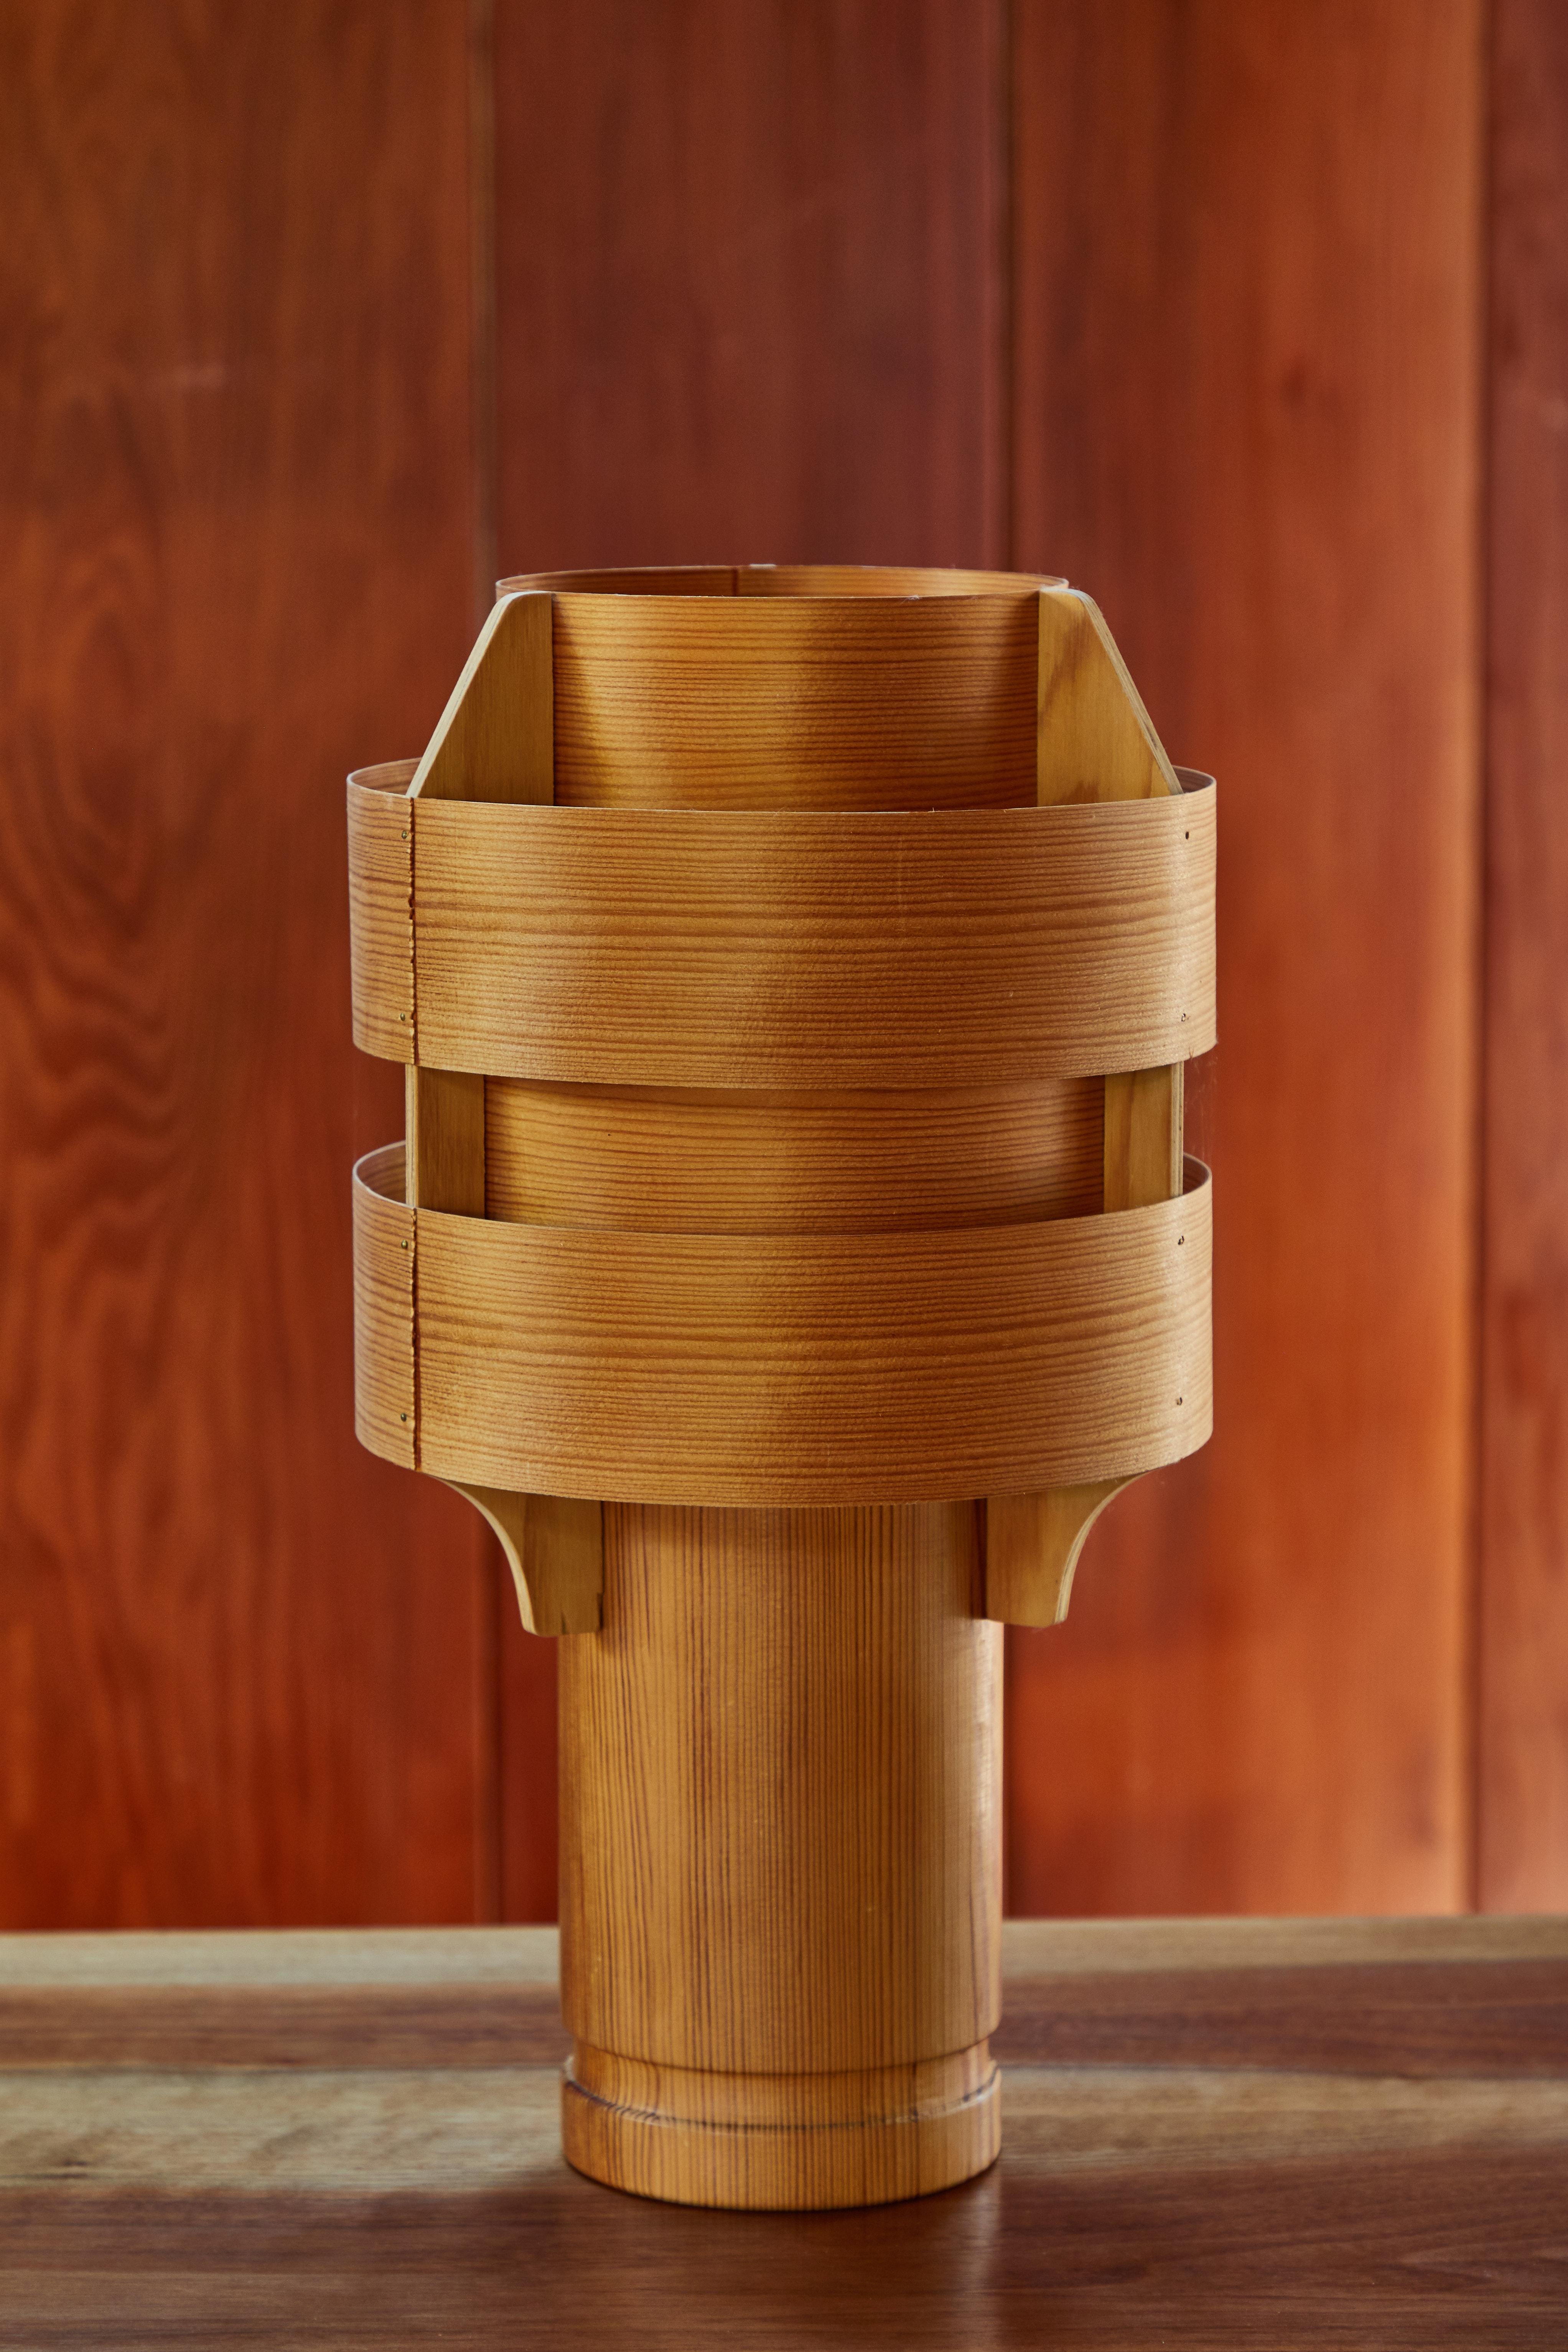 Rare 1960s Hans-Agne Jakobsson Model 243 wood table lamp for AB Ellysett. Designed and produced by Jakobsson in Markaryd, Sweden and executed in thin bentwood with solid wood base. A uniquely architectural and exceedingly rare lamp that is so